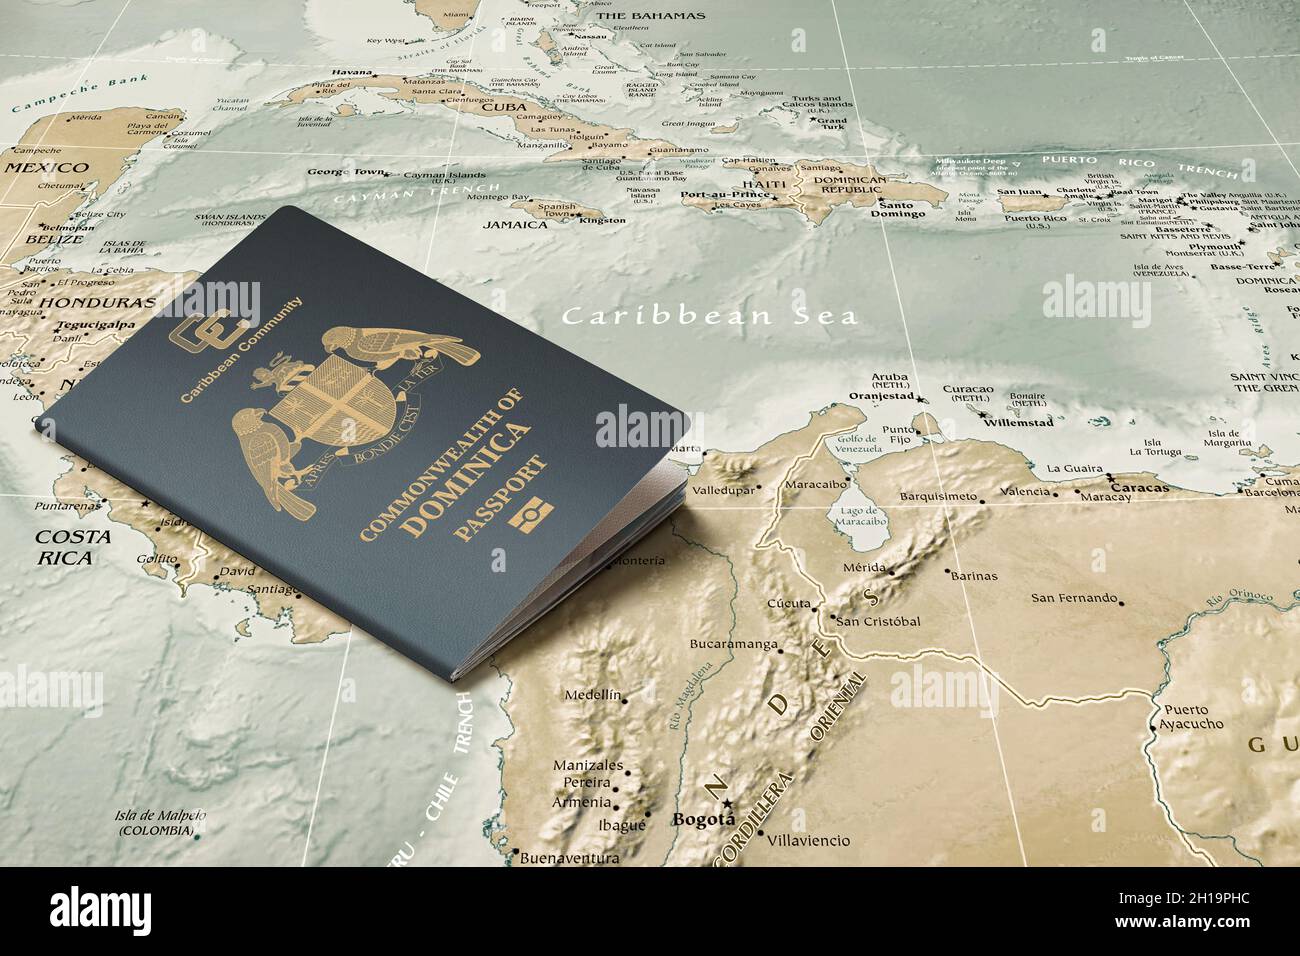 Dominica passport on a map of the Caribbean Sea, copy space Stock Photo